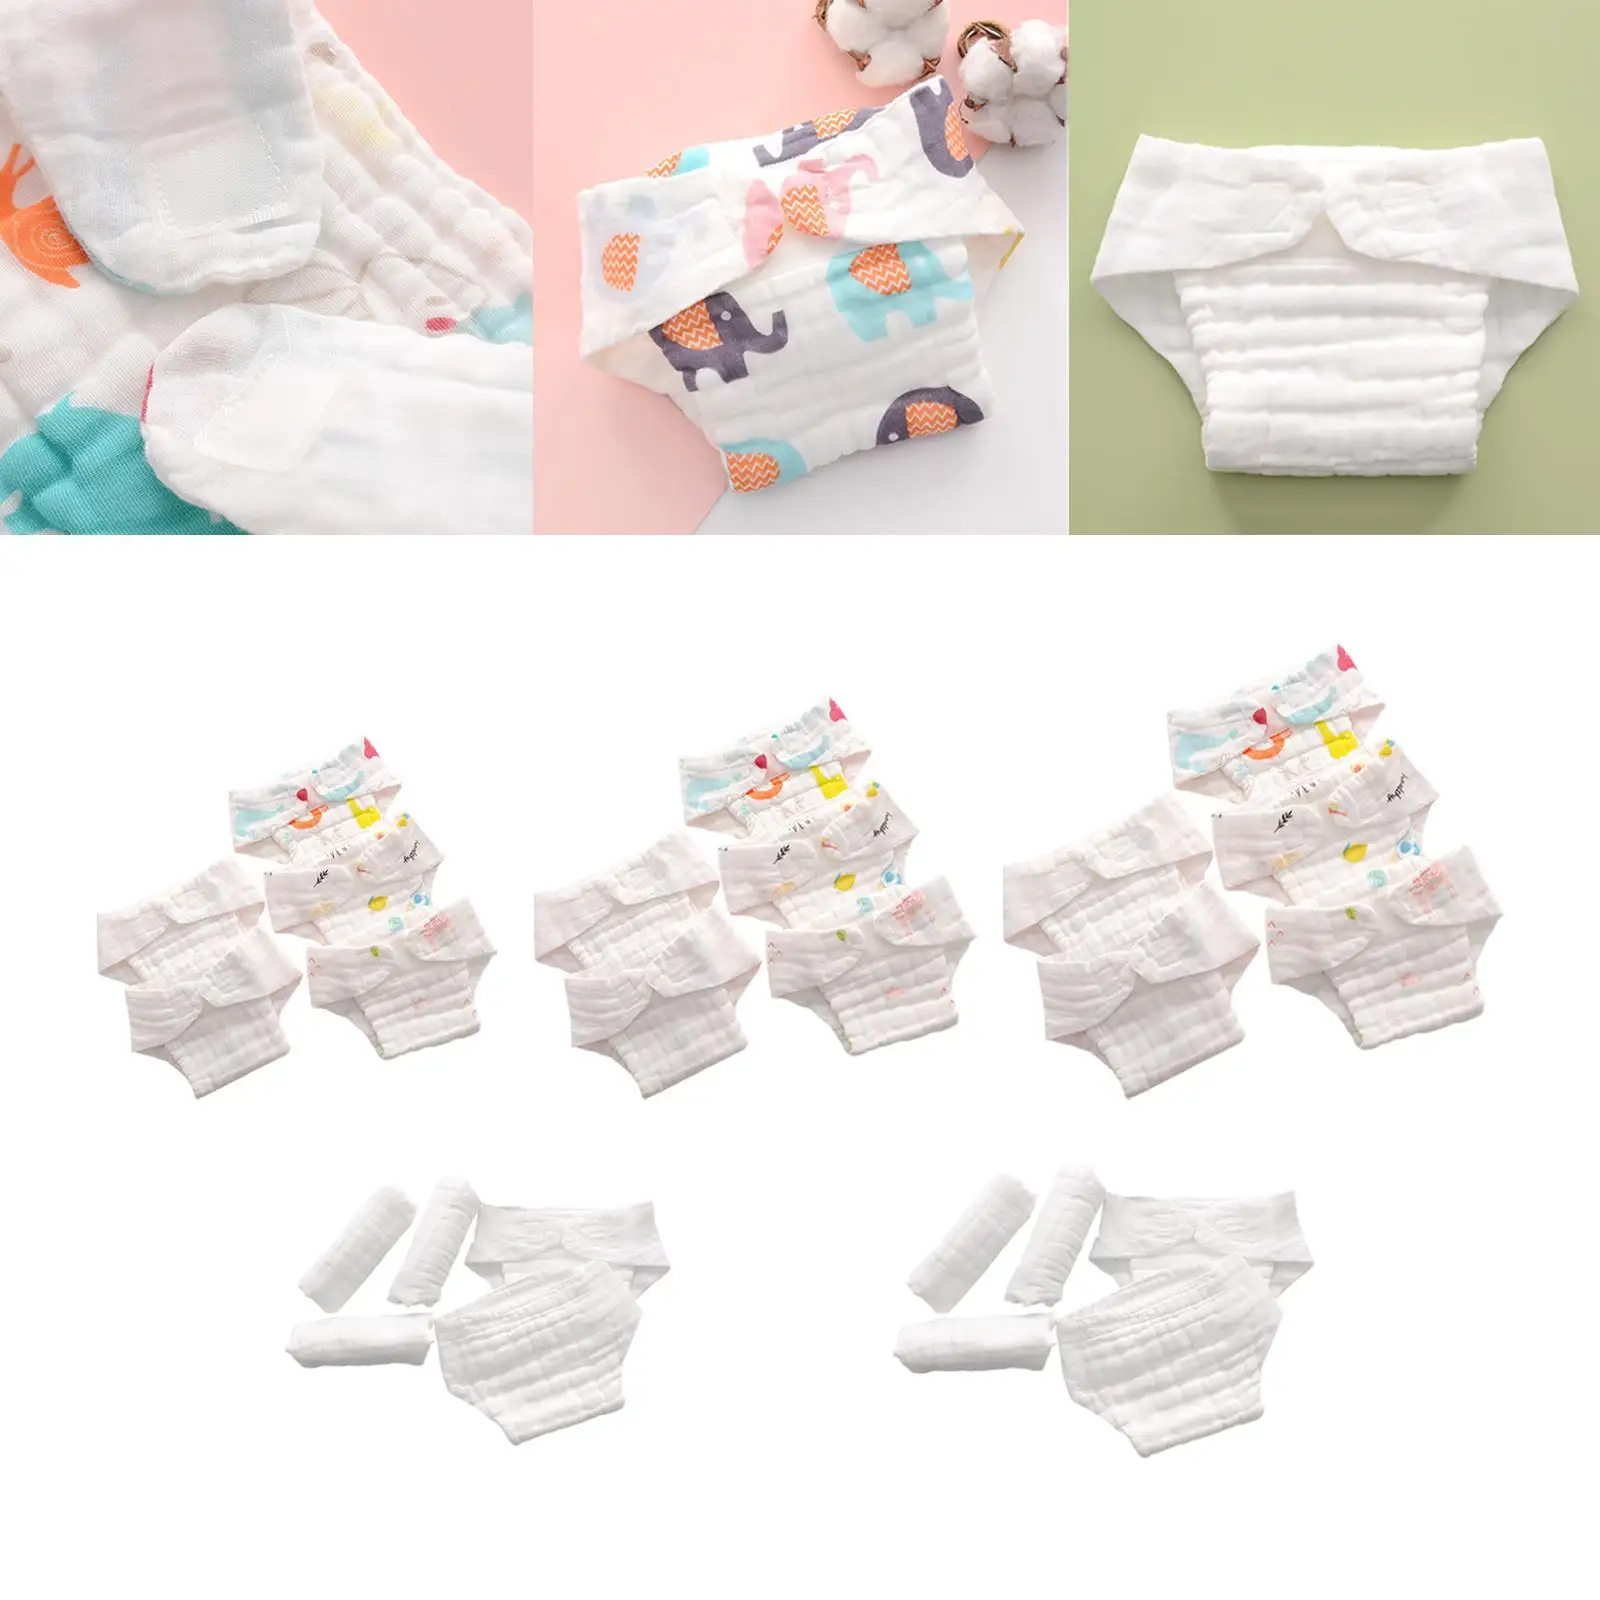 Washable Newborn Diaper Nappy Reusable Baby Diapers